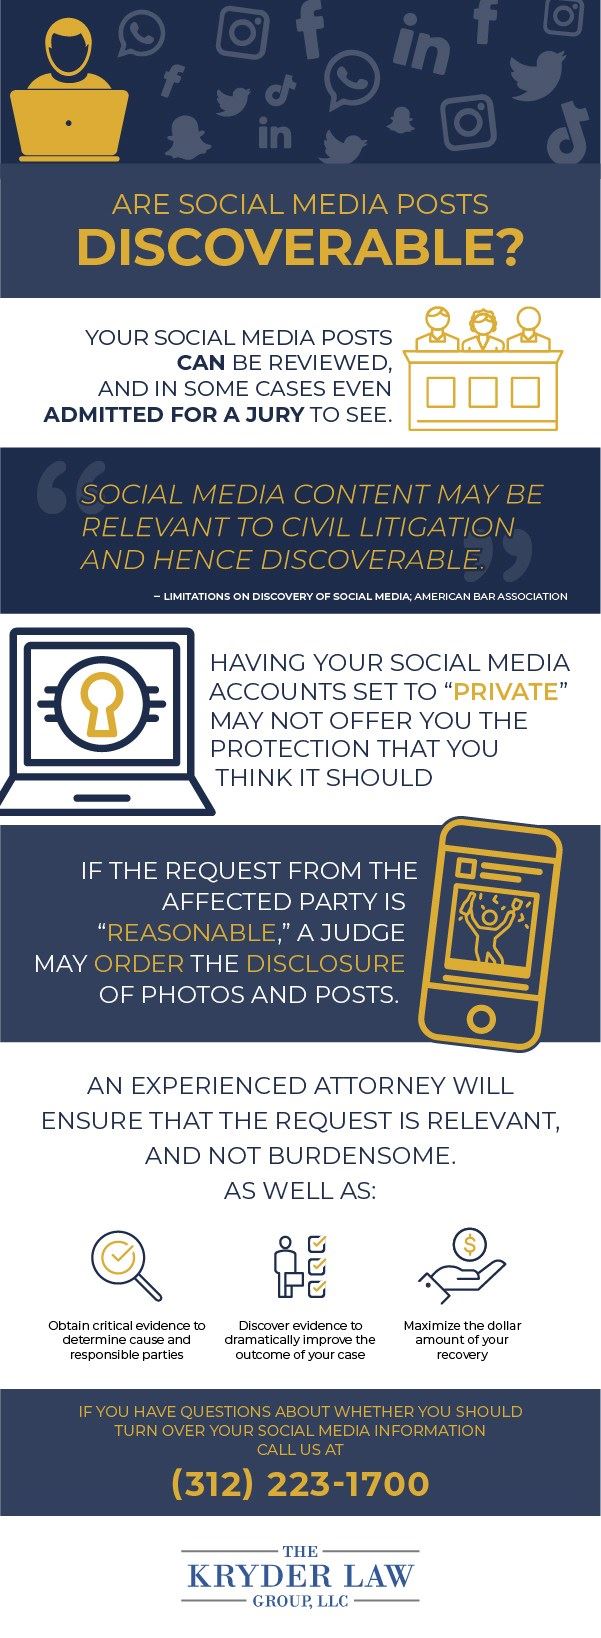 Social Media Posts in Court Infographic